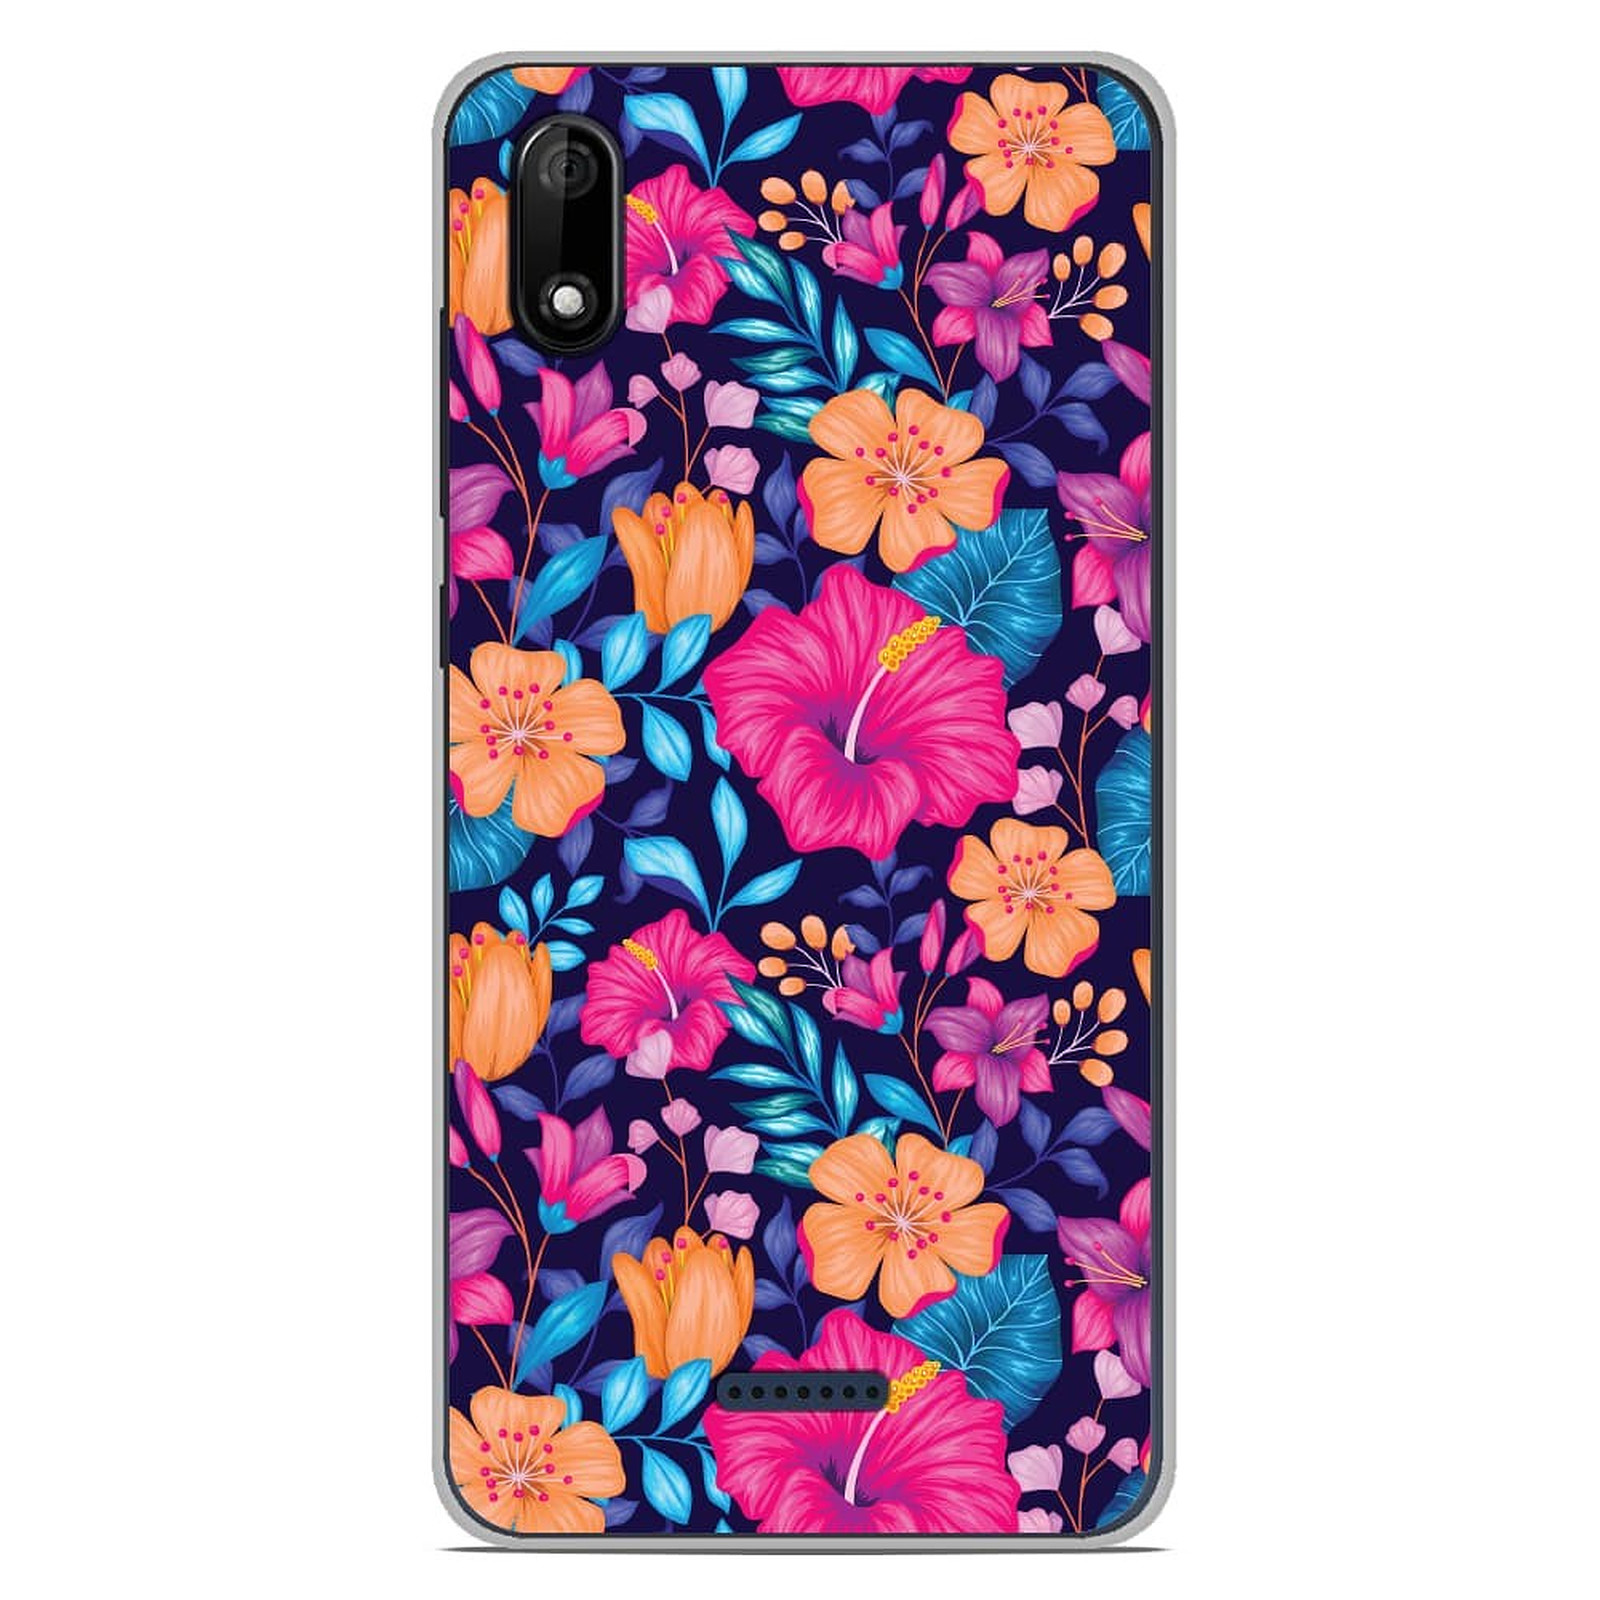 1001 Coques Coque silicone gel Wiko Y50 motif Fleurs Exotiques - Coque telephone 1001Coques